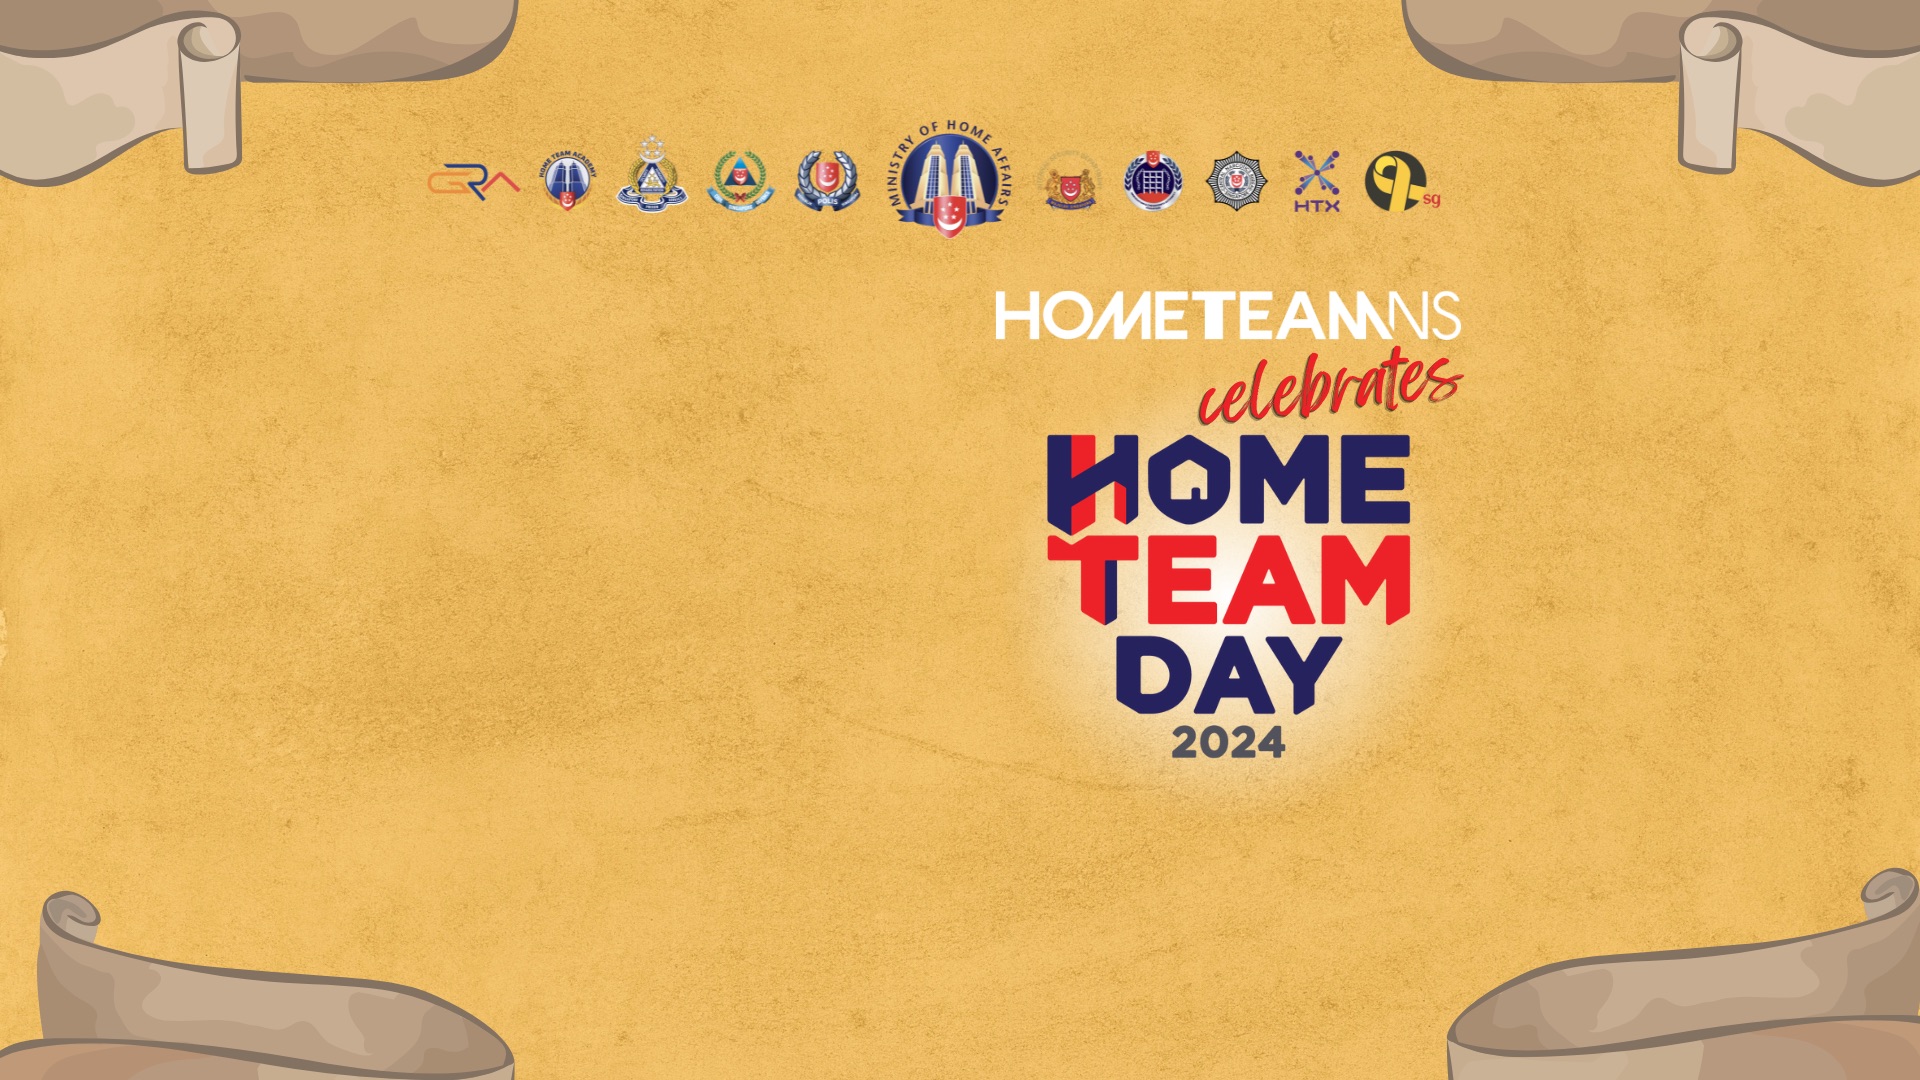 Home Team Day 2024 WEB Banner (1201 x 375 px) (1920 x 1080 px) - 3